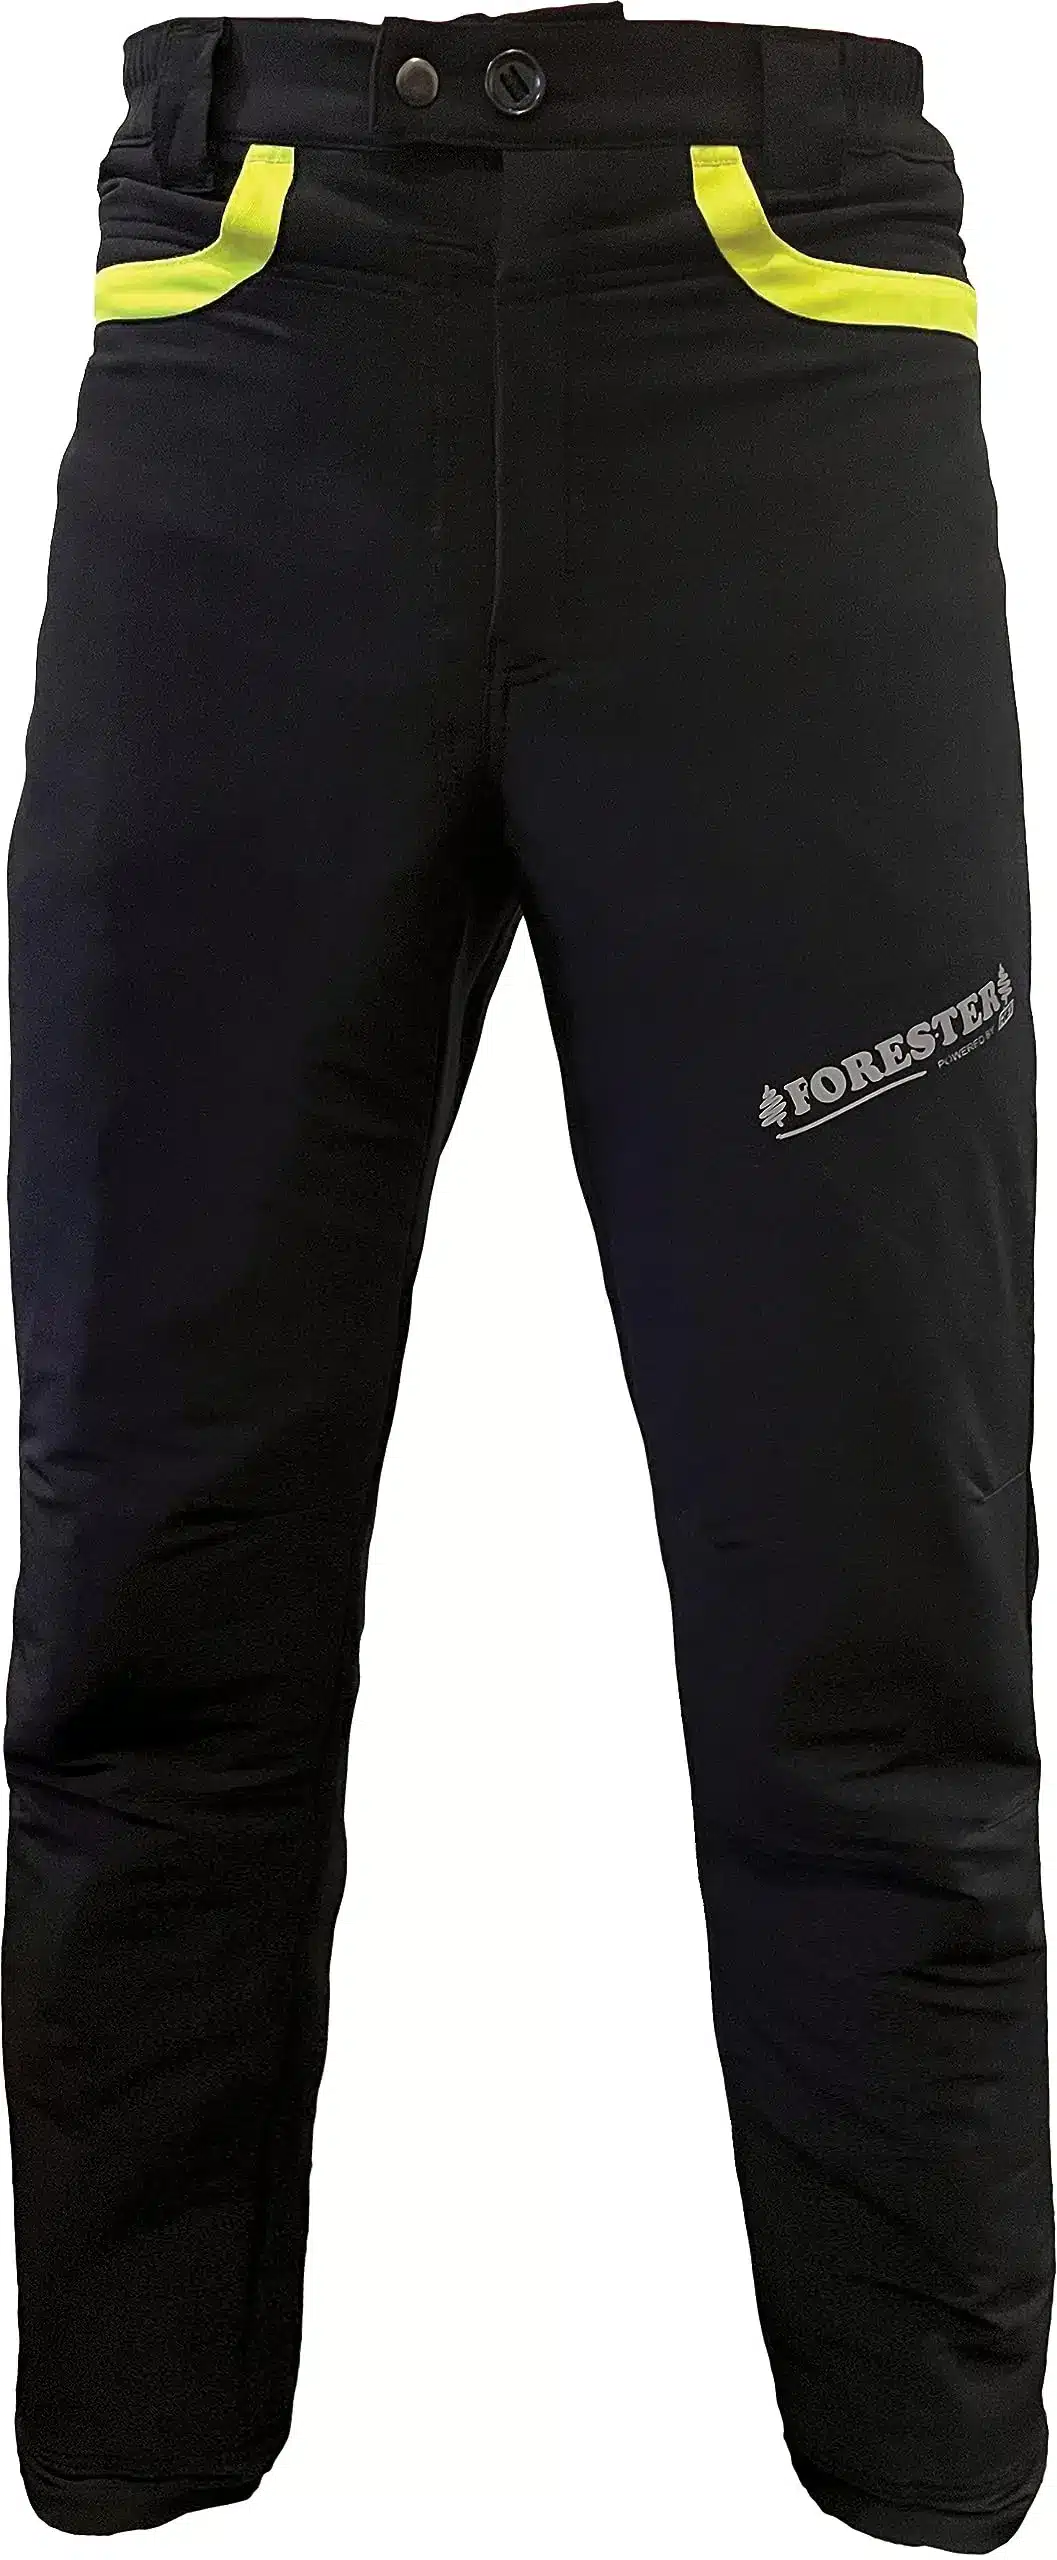 Forester chainsaw pants